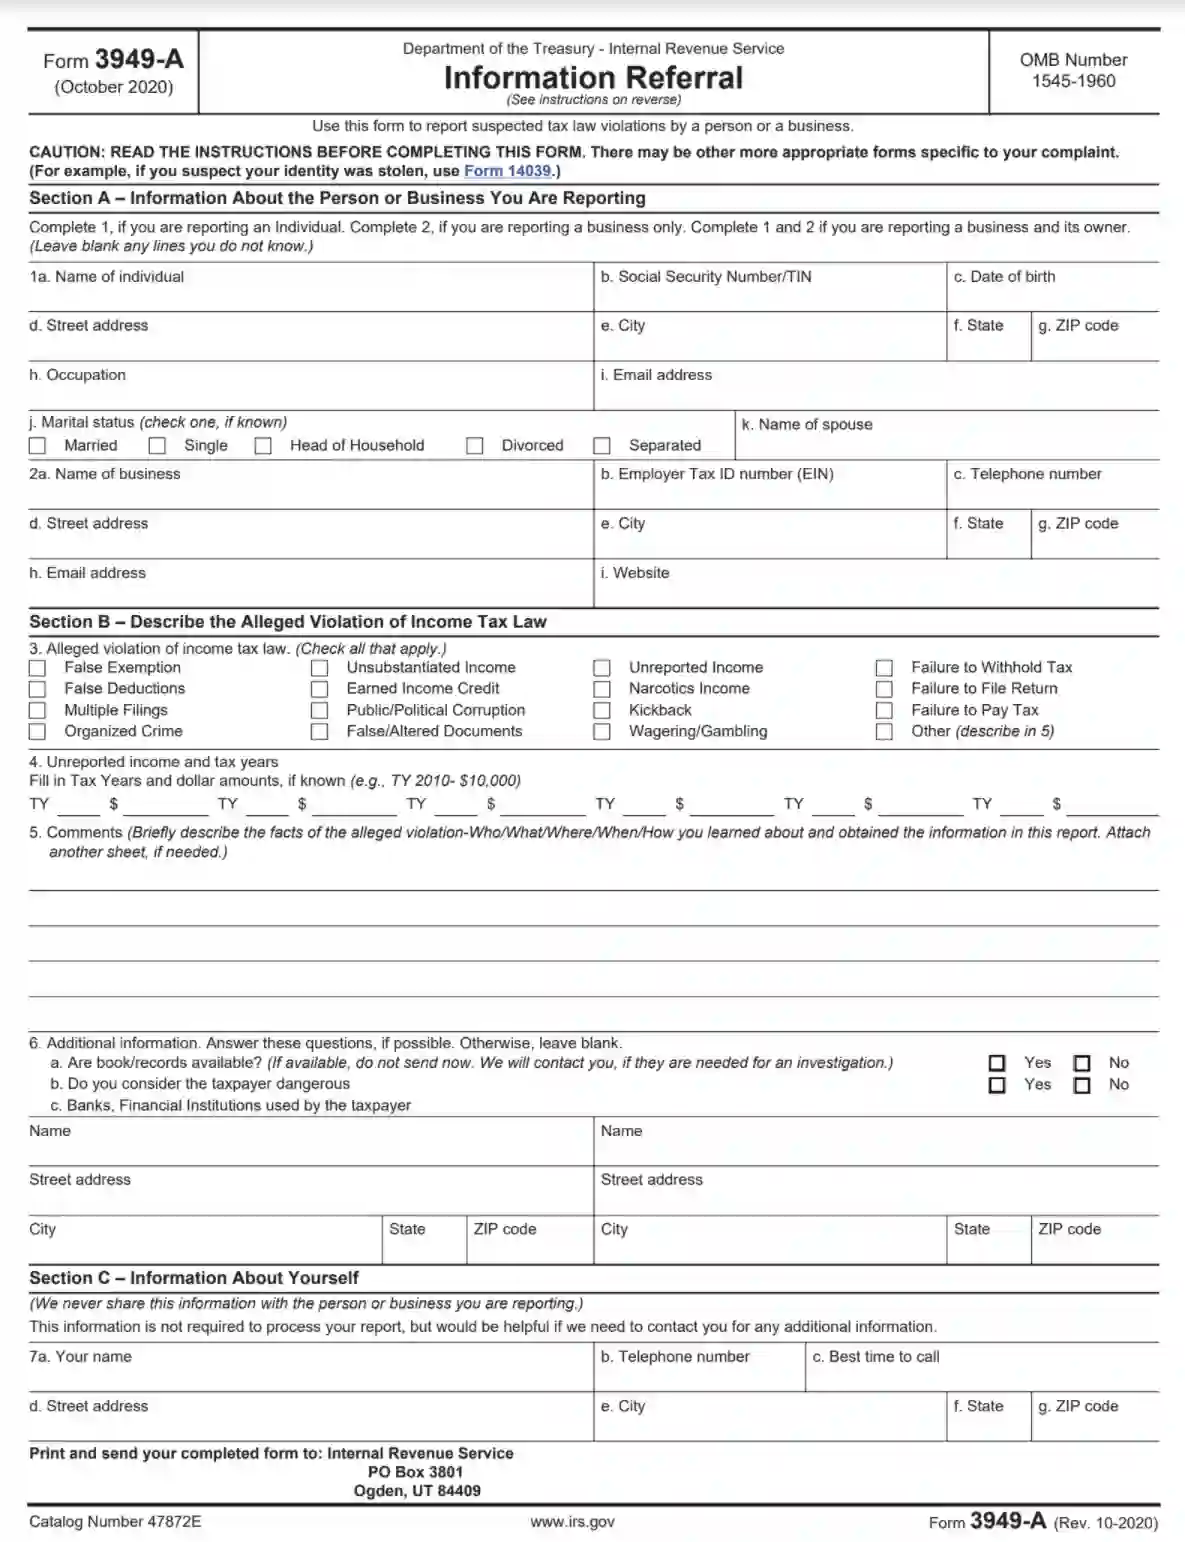 irs form 3949 a